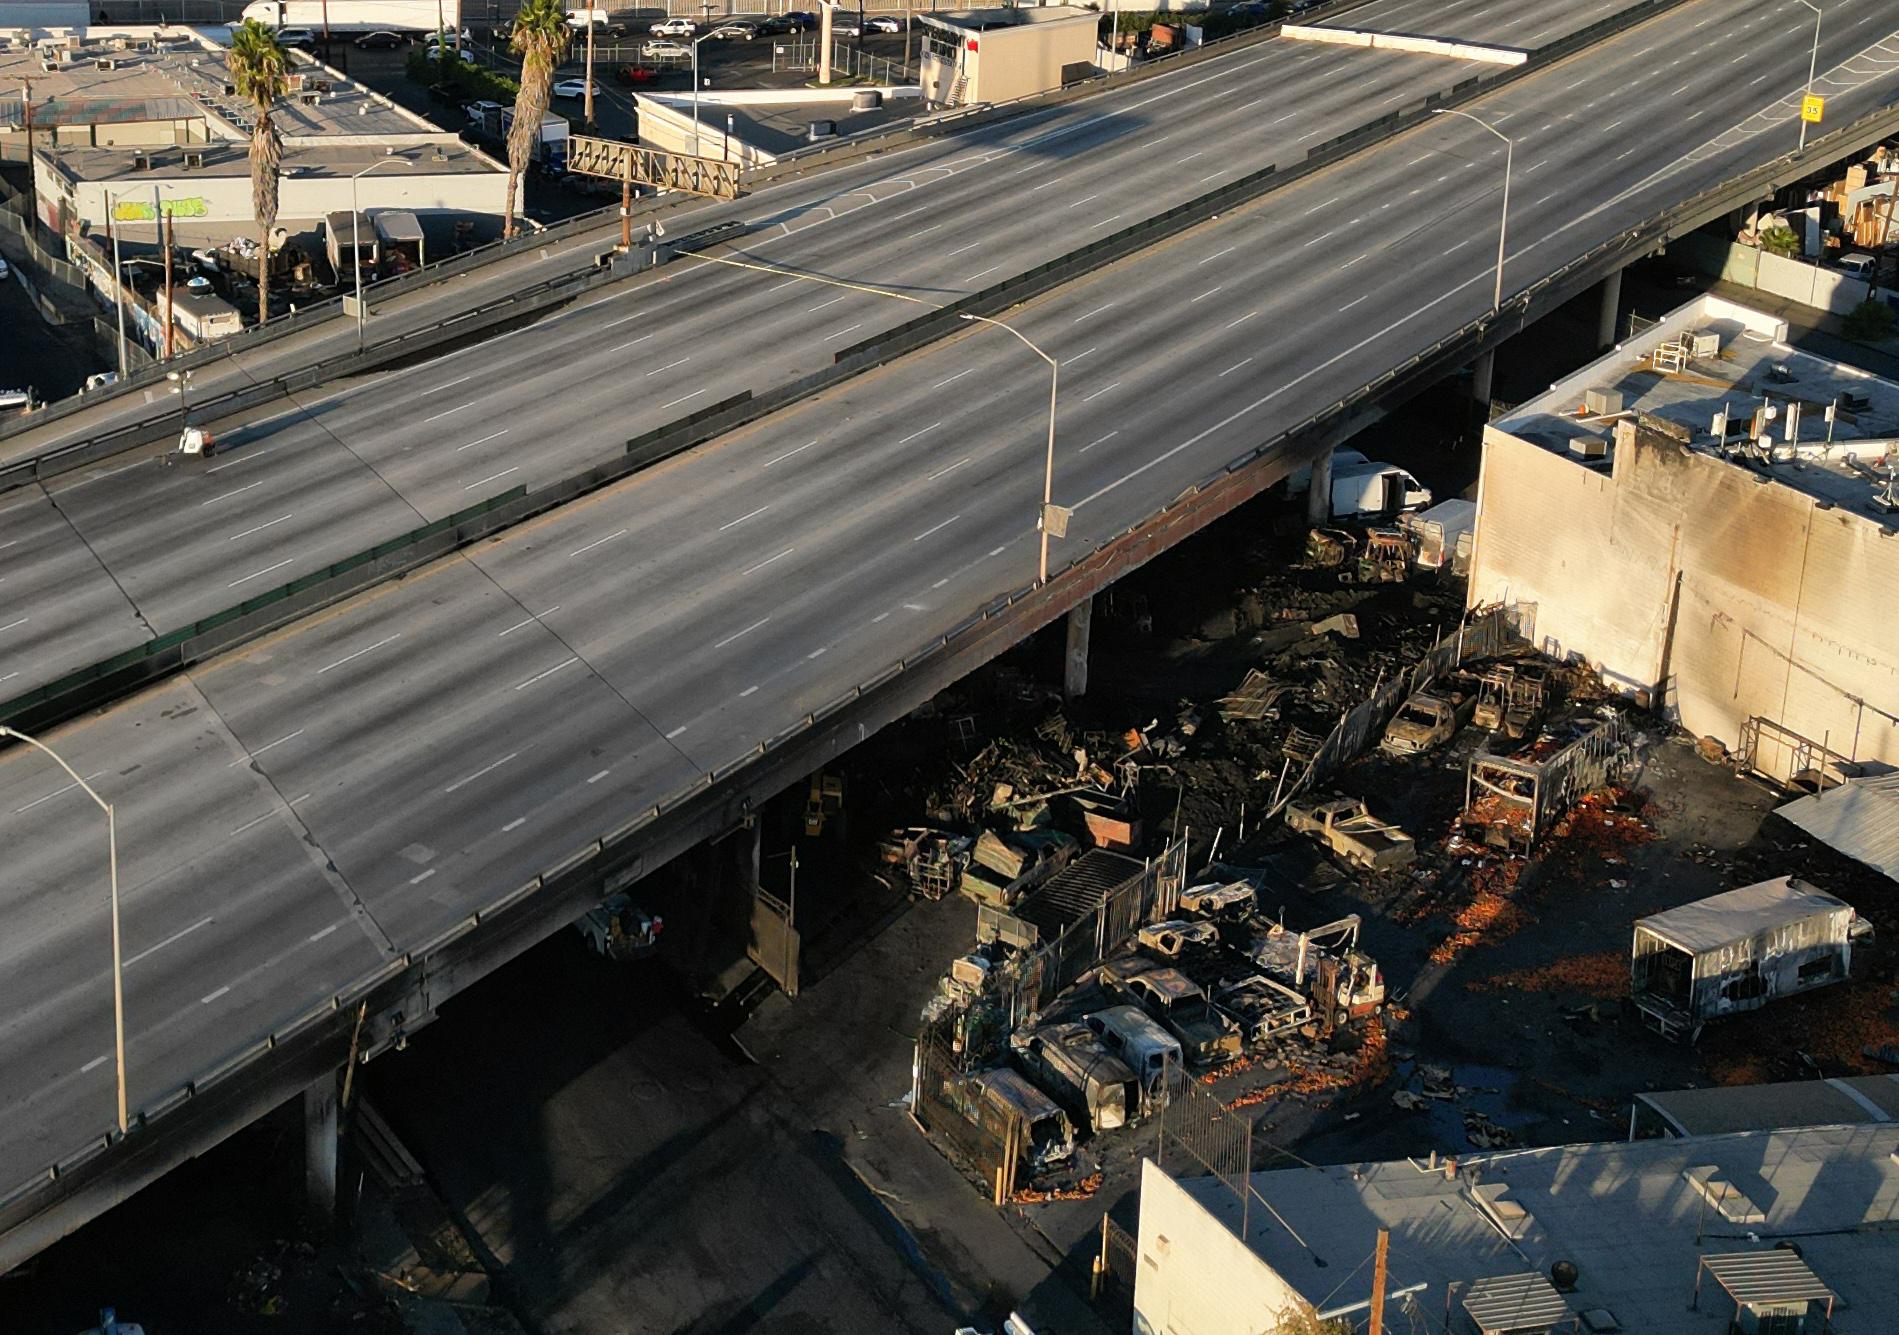 Officials: I-10 Freeway in Los Angeles Set to Reopen by Mid-December